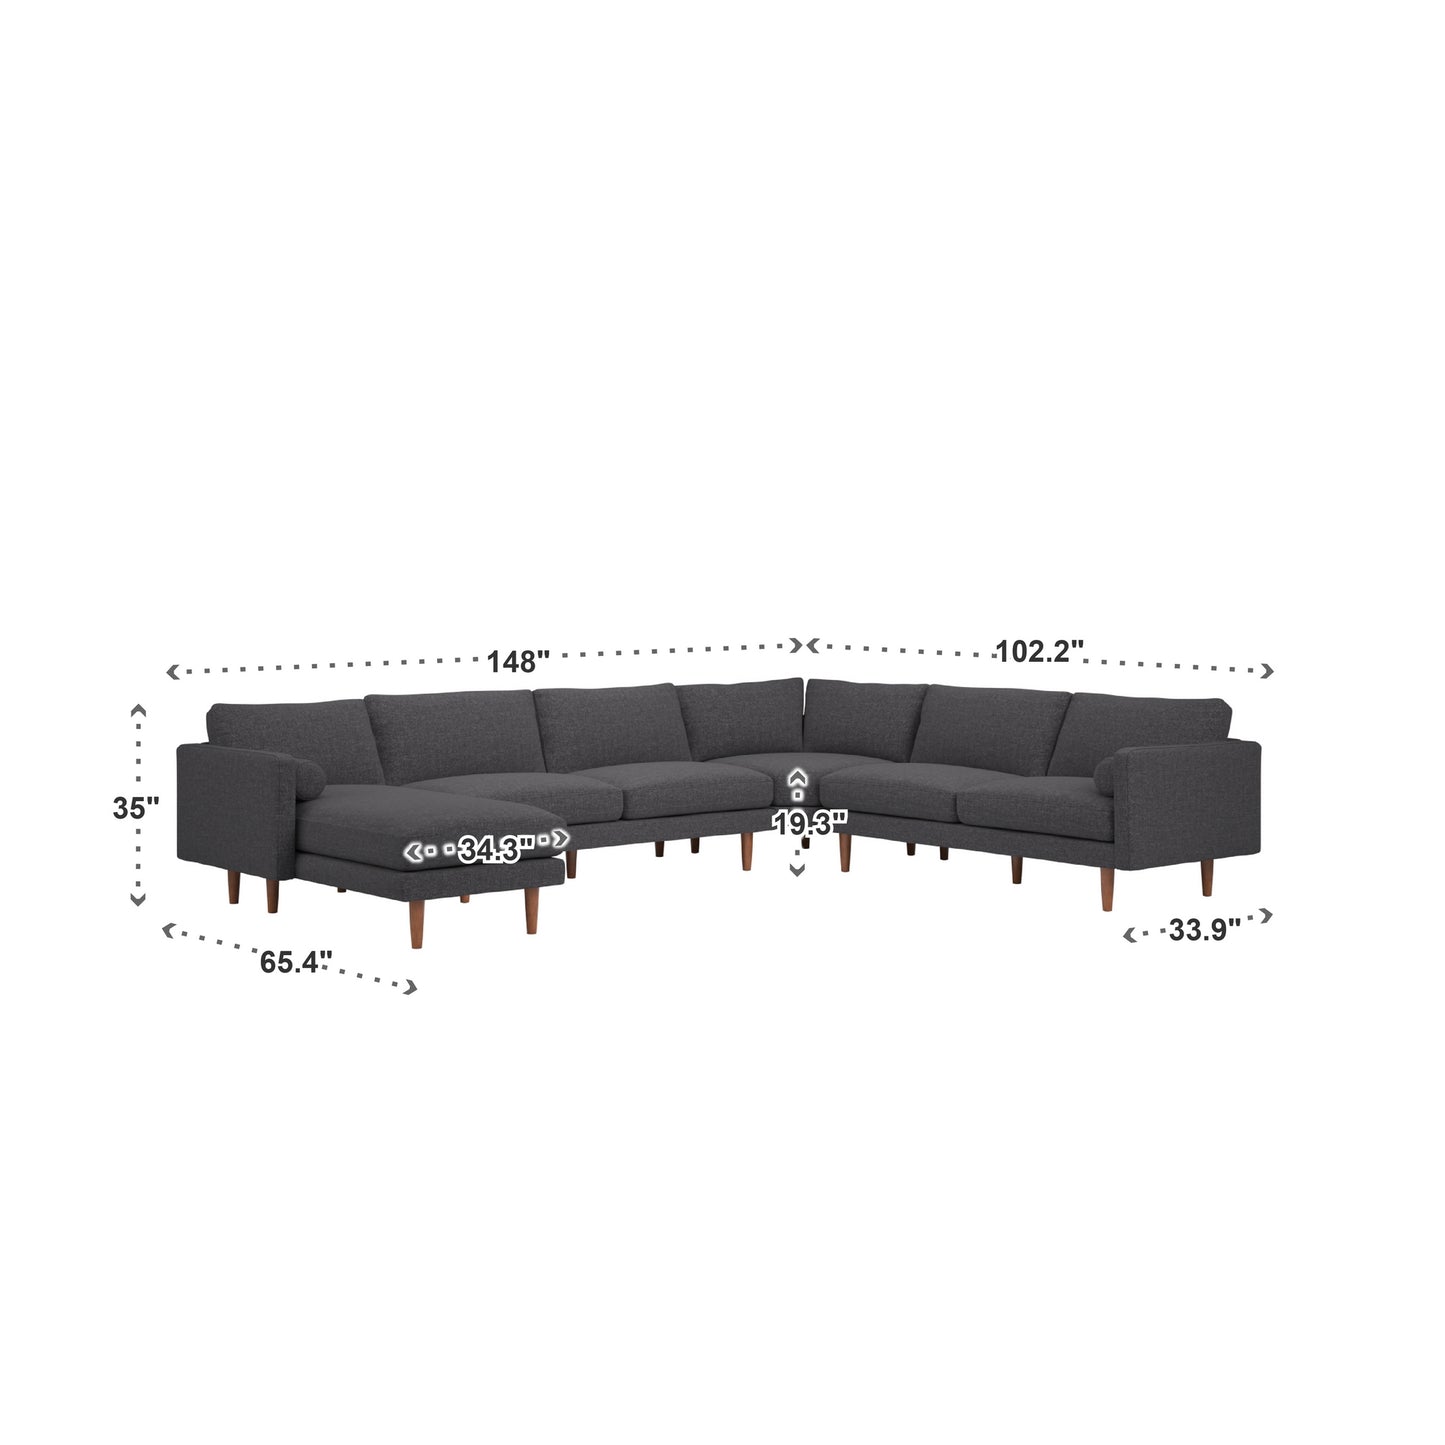 Mid-Century Upholstered Sectional Sofa - Black, 7-Seat, U-Shape Sectional with Left-Facing Chaise